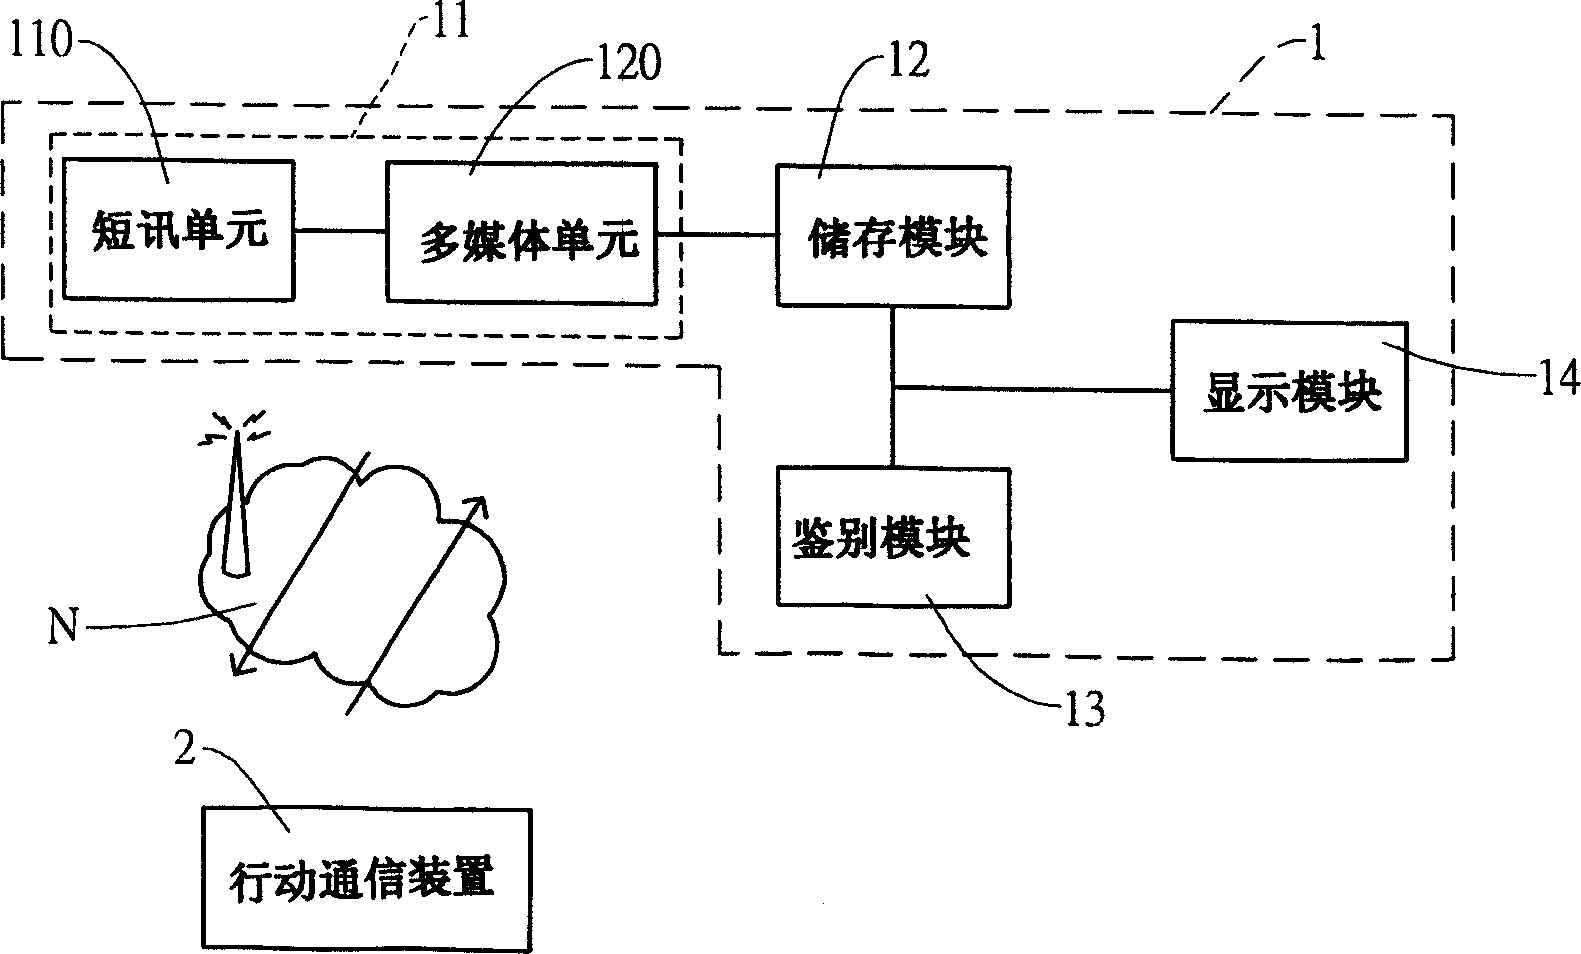 Multi-mode real-time information processing system